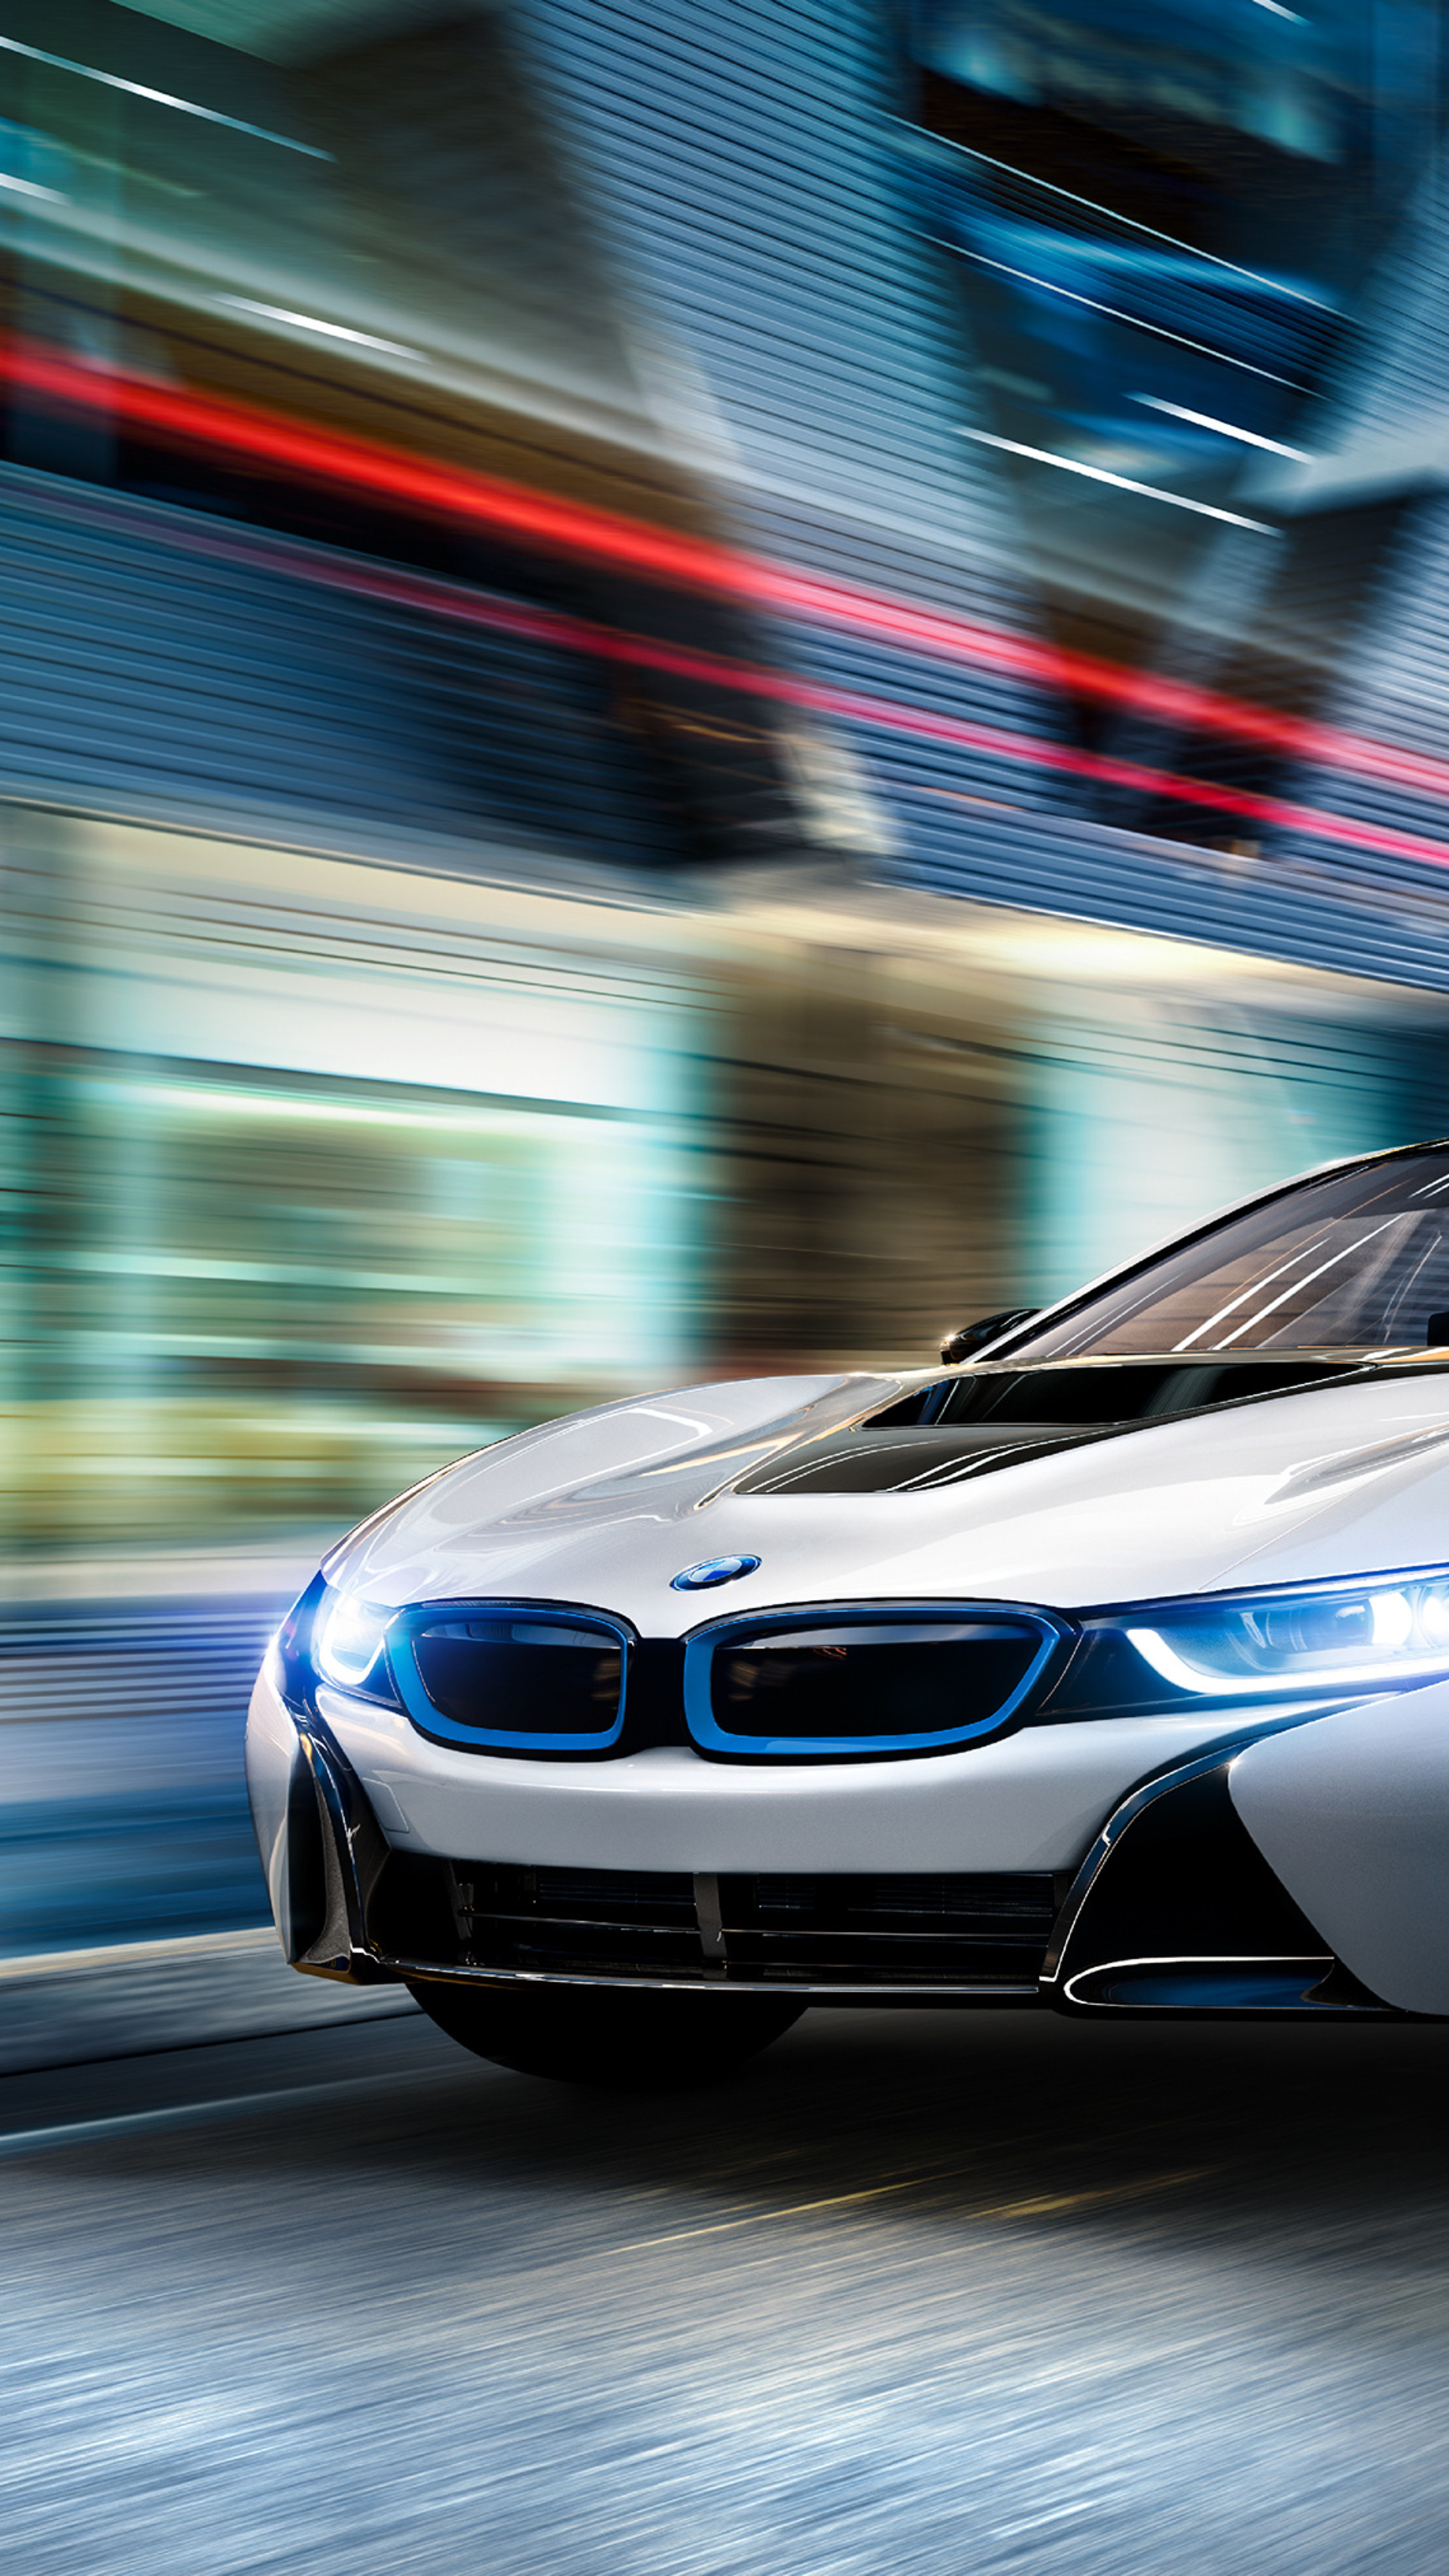 BMW i8, Nighttime beauty, Cutting-edge technology, Automotive excellence, Unmatched power, 2160x3840 4K Handy